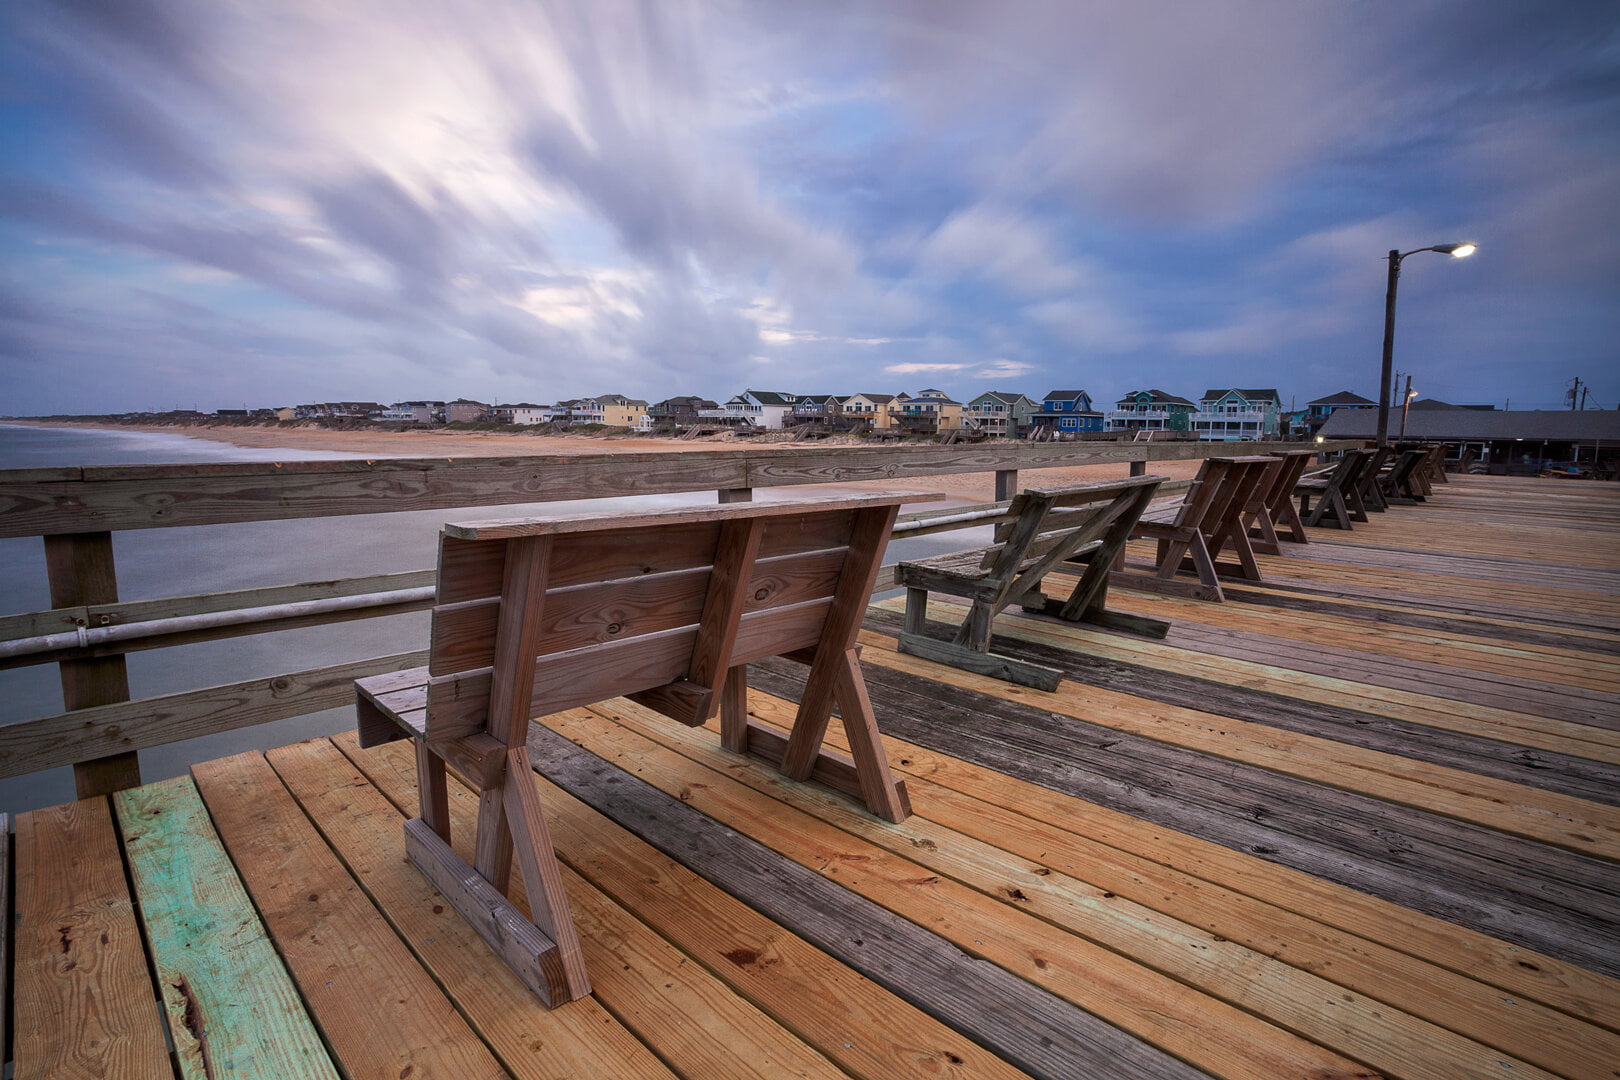 Things To Do In Nags Head, NC